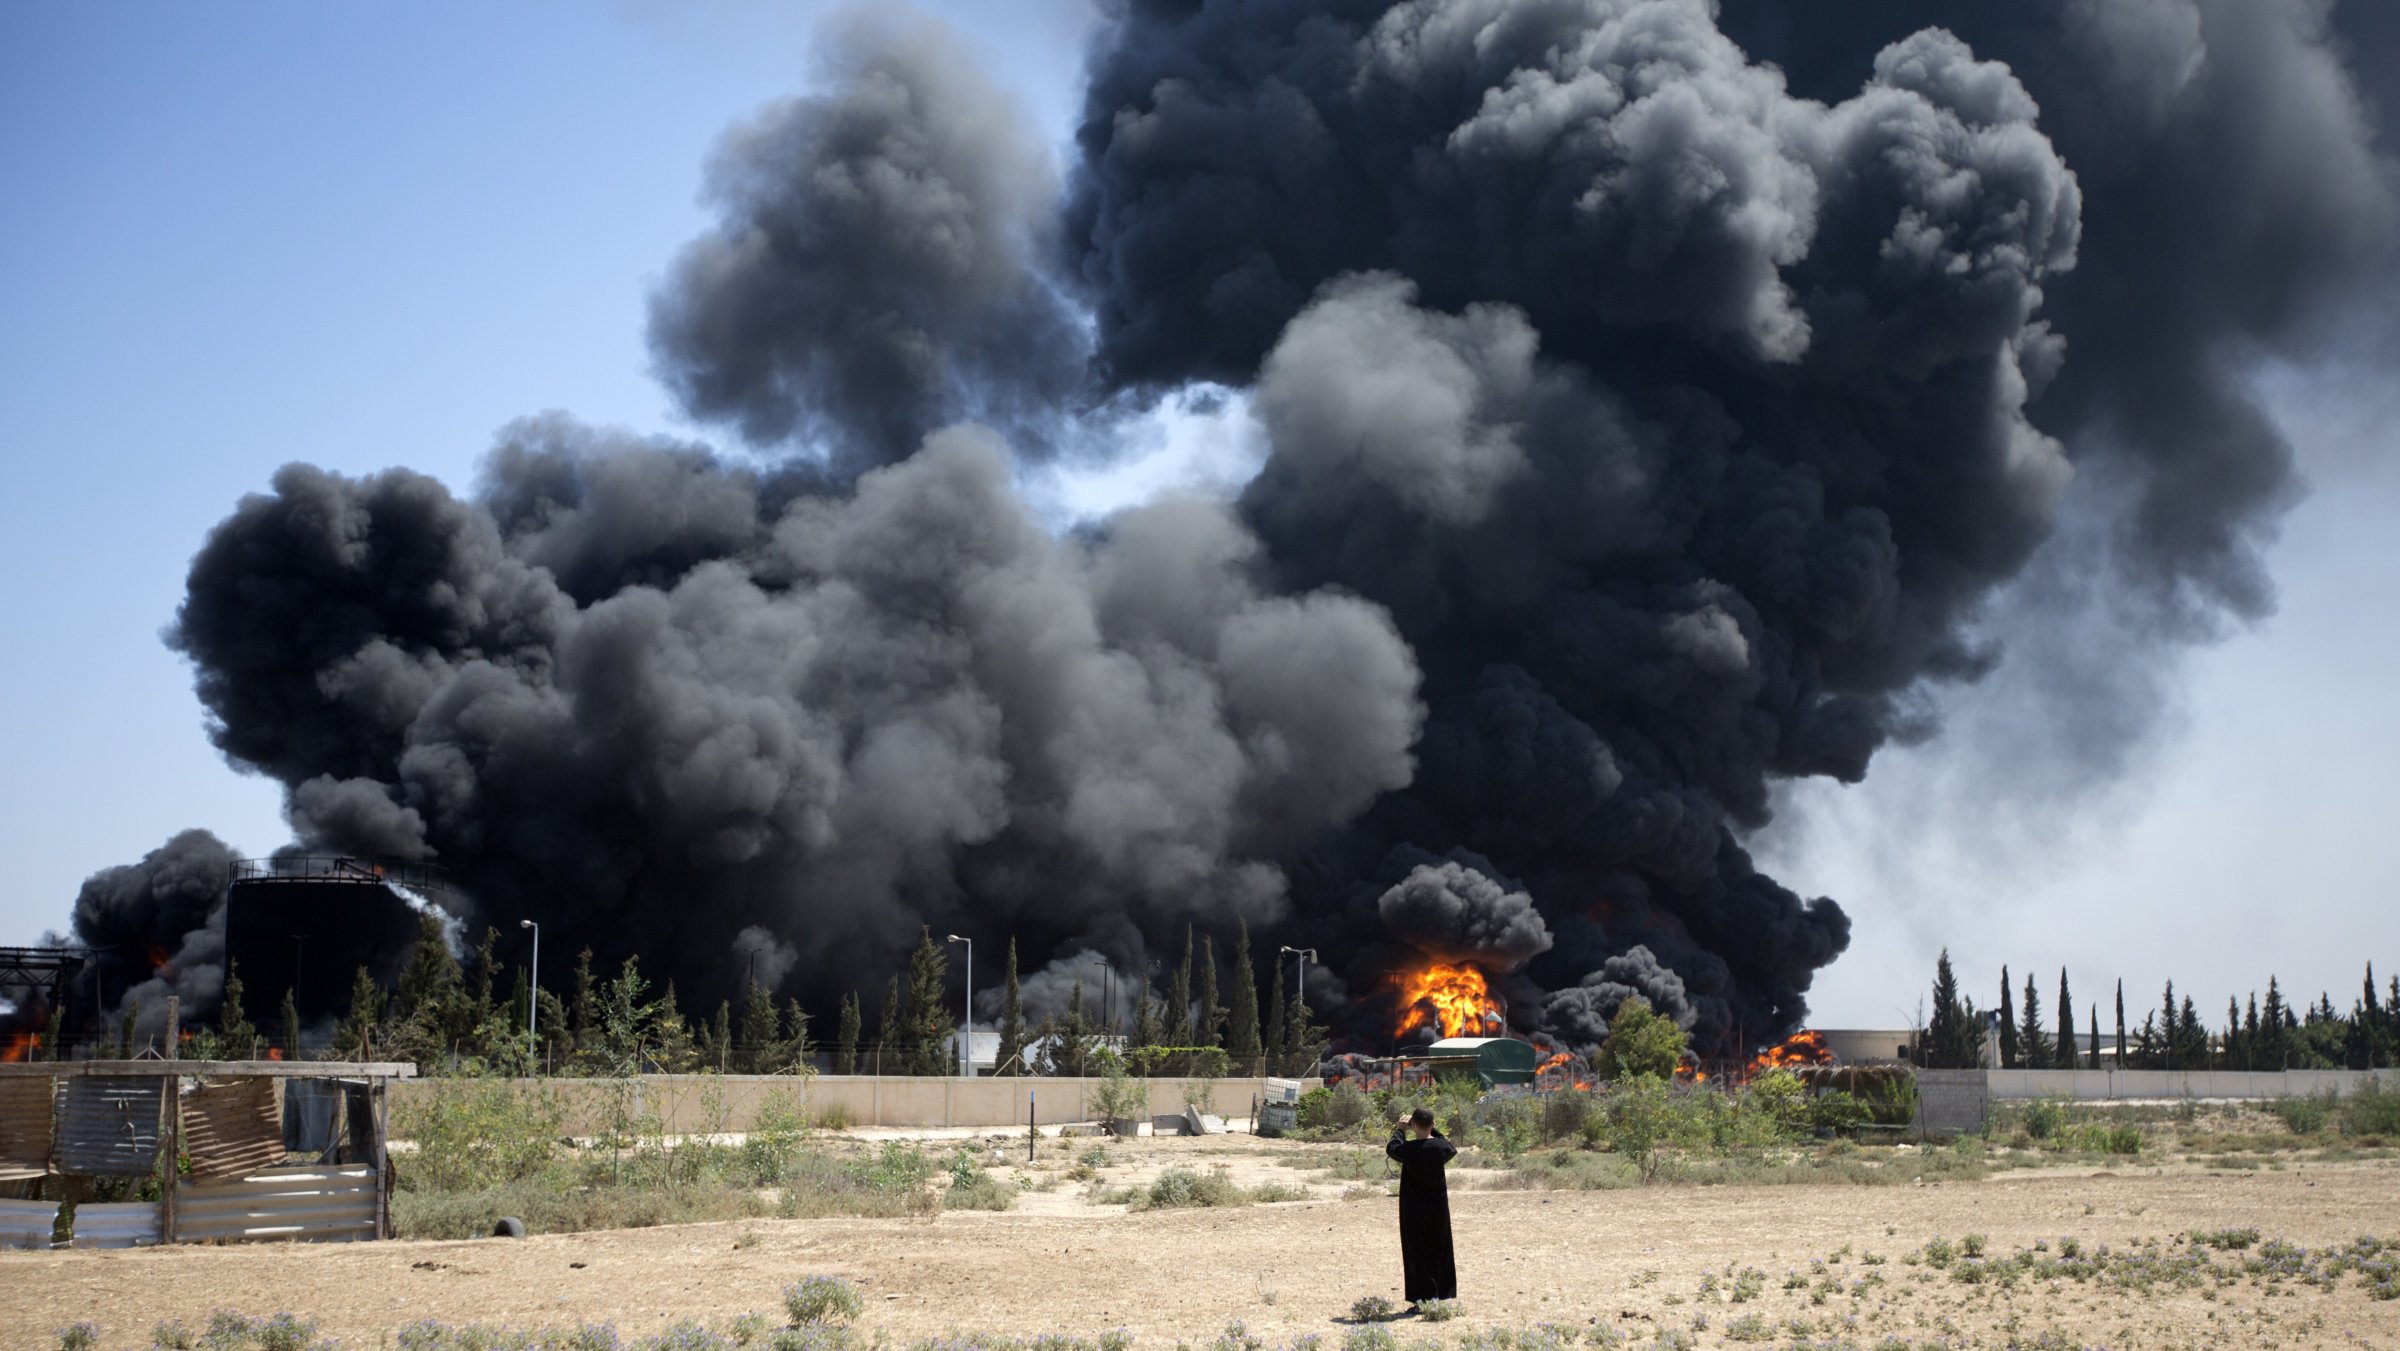 A Palestinian man stands looking as flames engulf the fuel tanks of the only power plant supplying electricity to the Gaza Strip after it was hit by overnight Israeli shelling, on July 29, 2014, in the south of Gaza City.